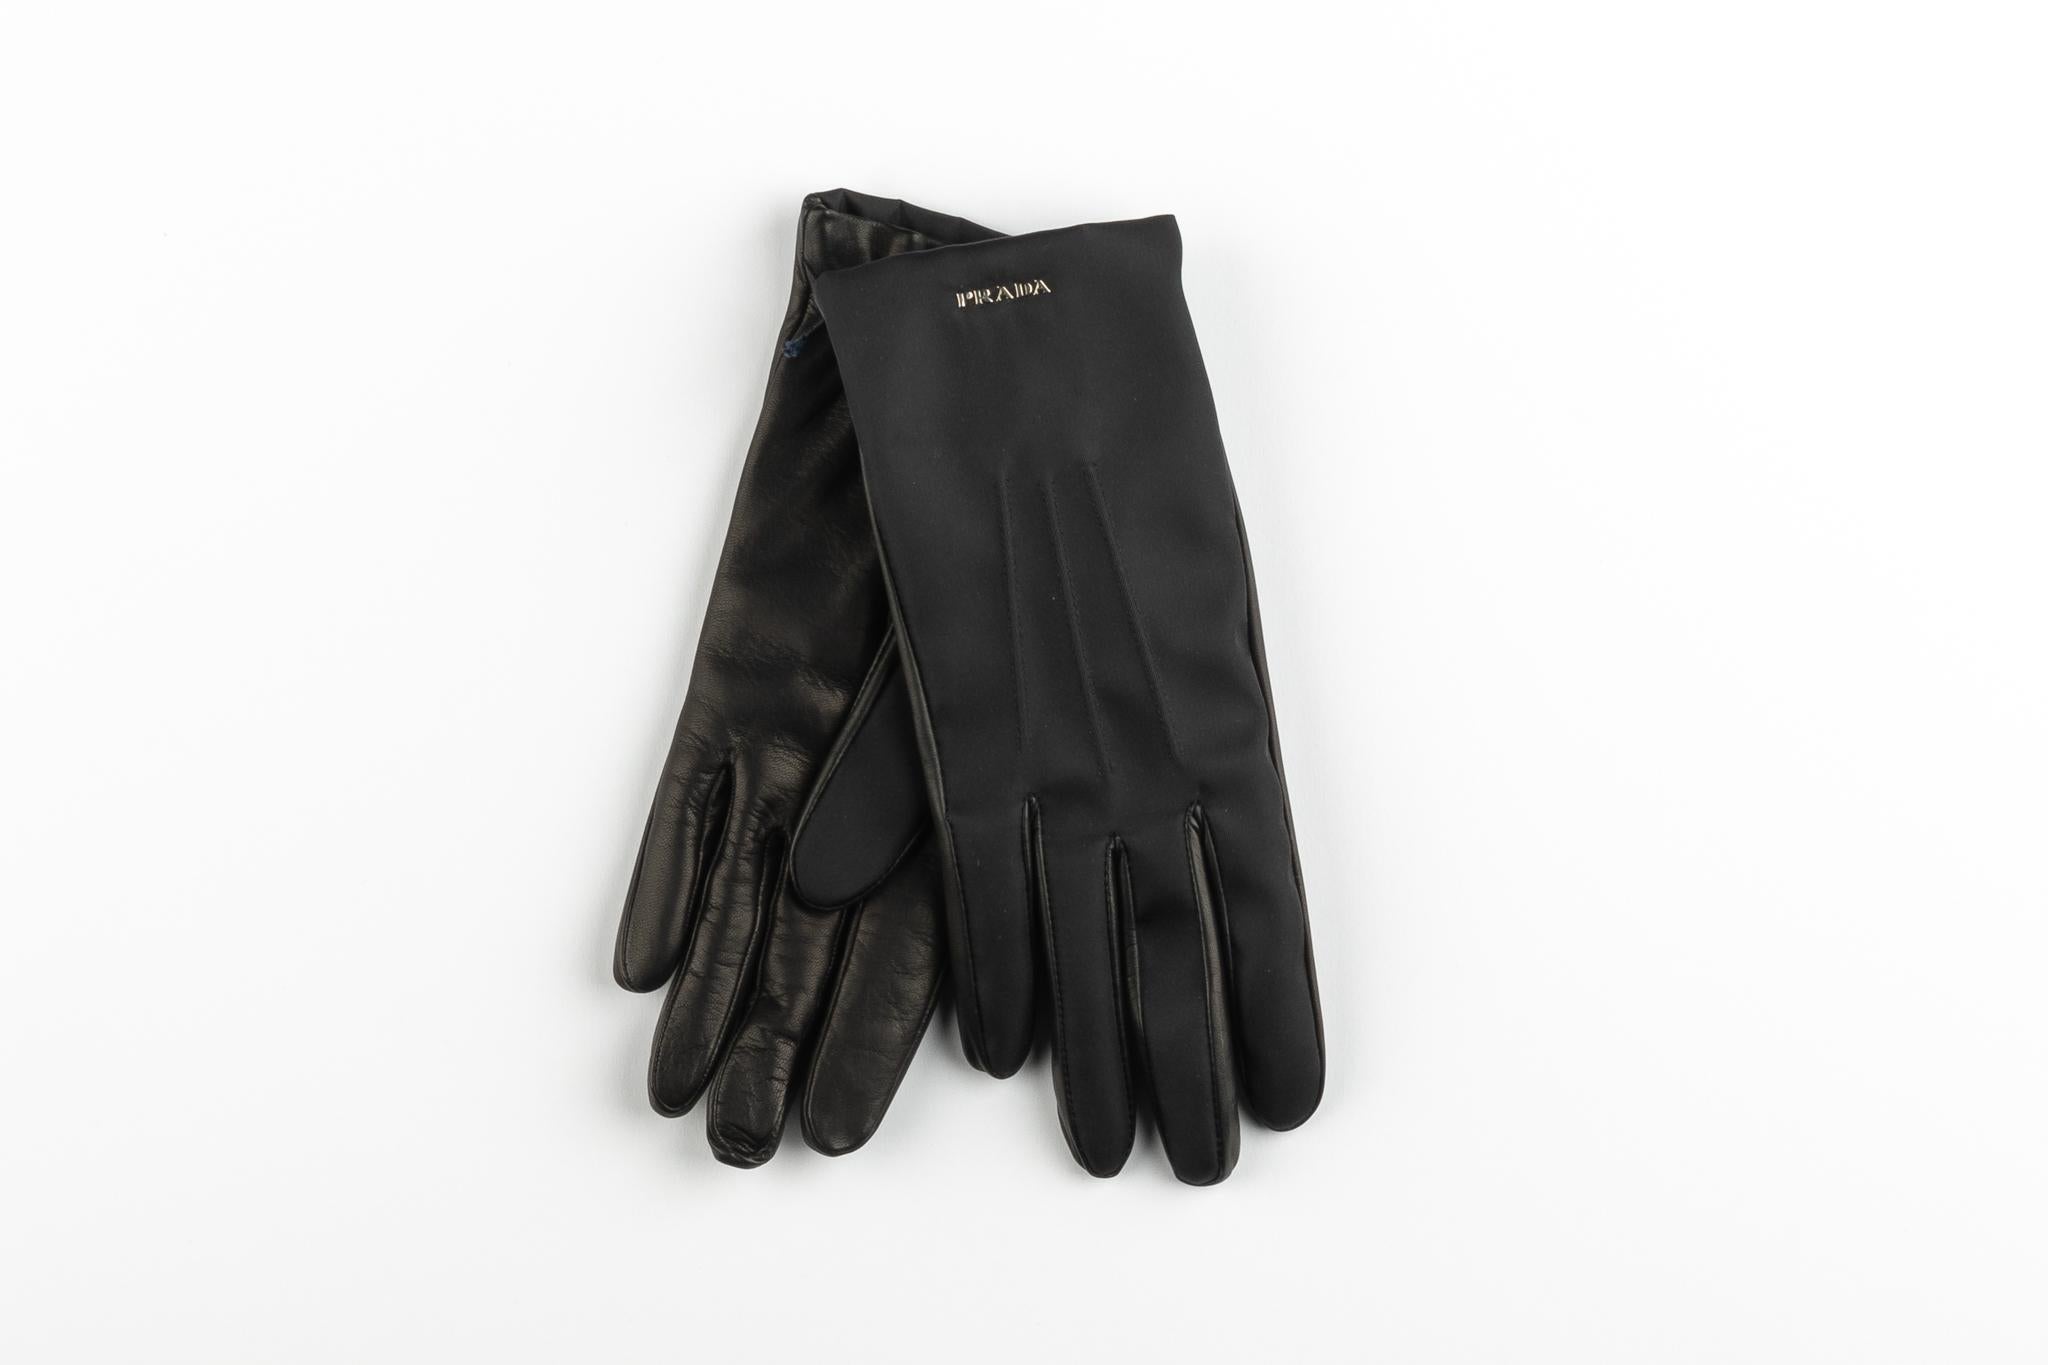 Prada made in Italy black leather ladies gloves . Brand new with tag and box. Size 6.5.
